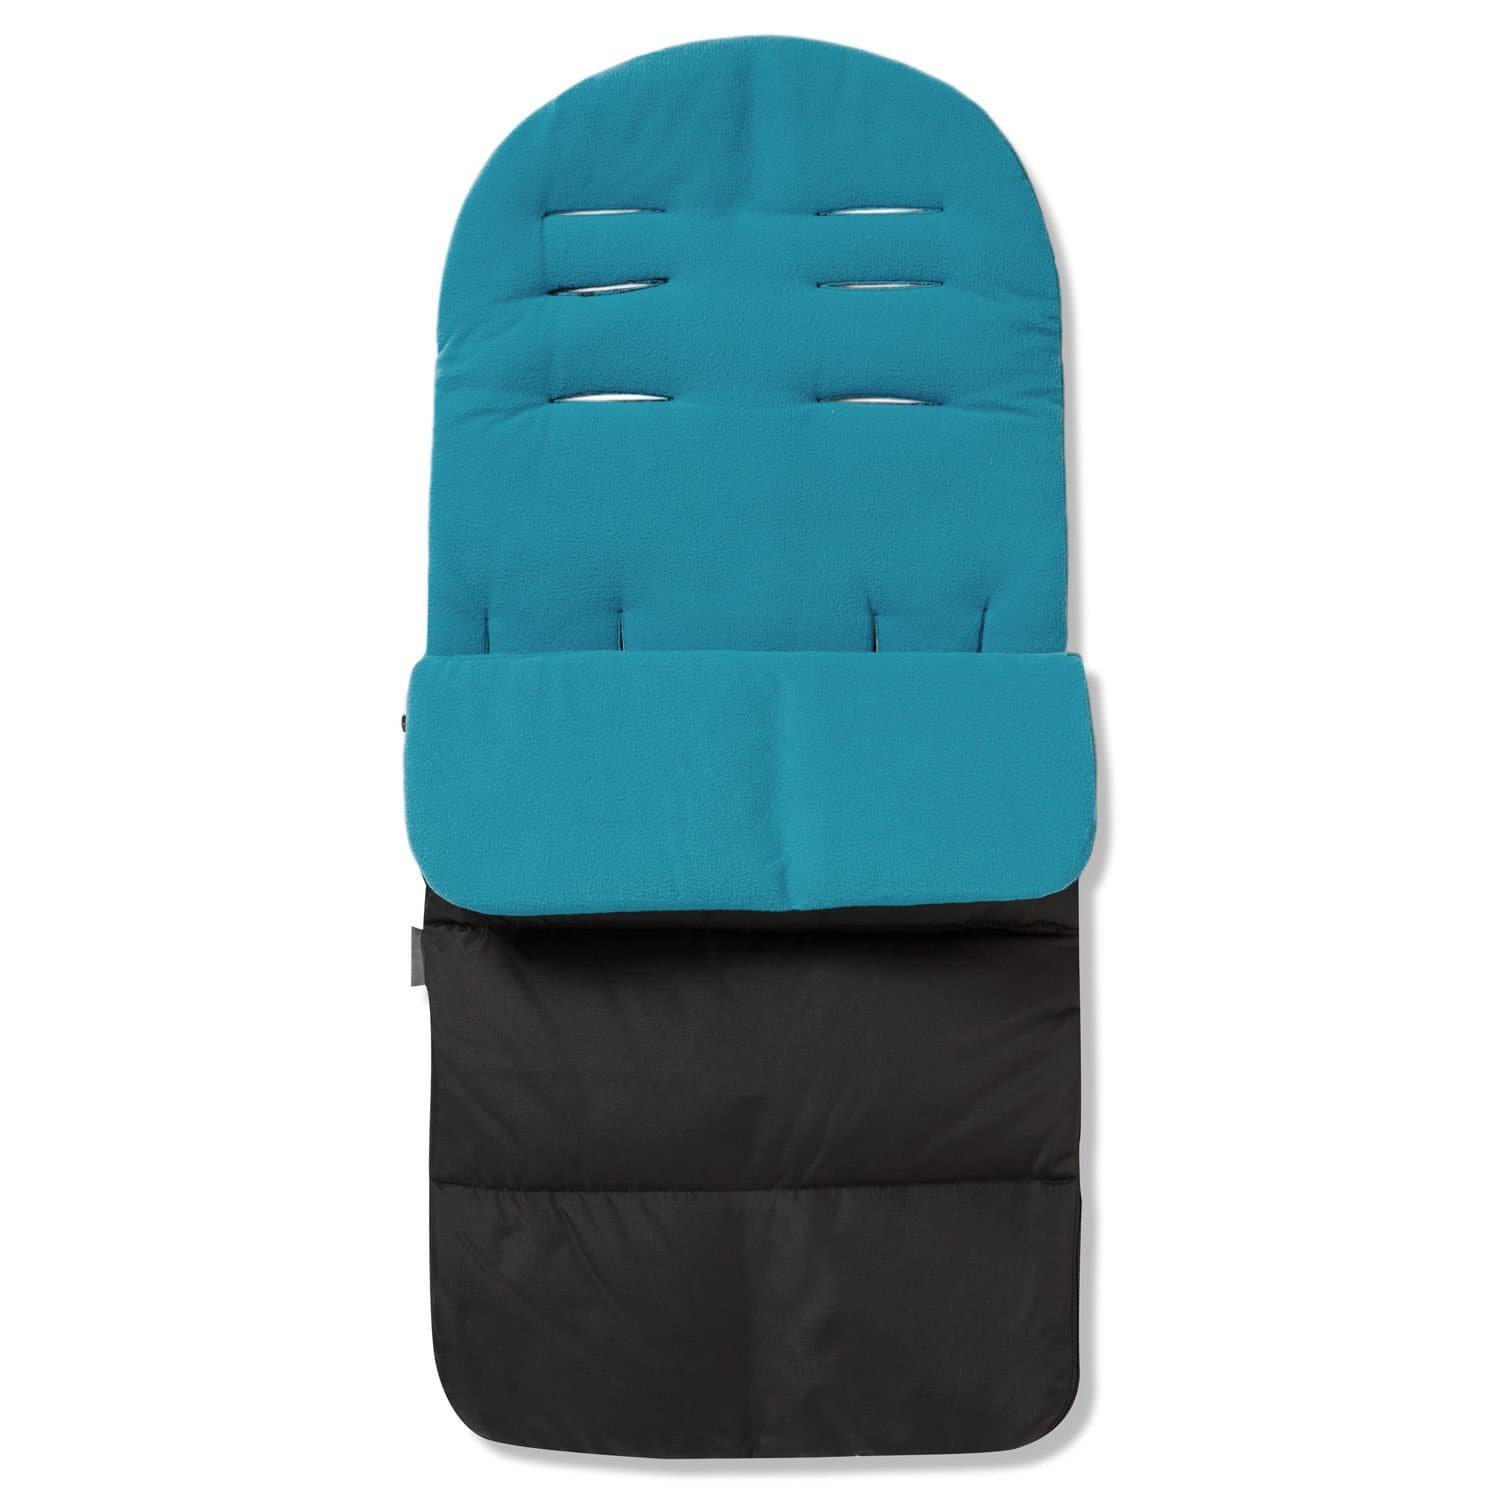 Premium Footmuff / Cosy Toes Compatible with Kids Kargo - Ocean Blue / Fits All Models | For Your Little One